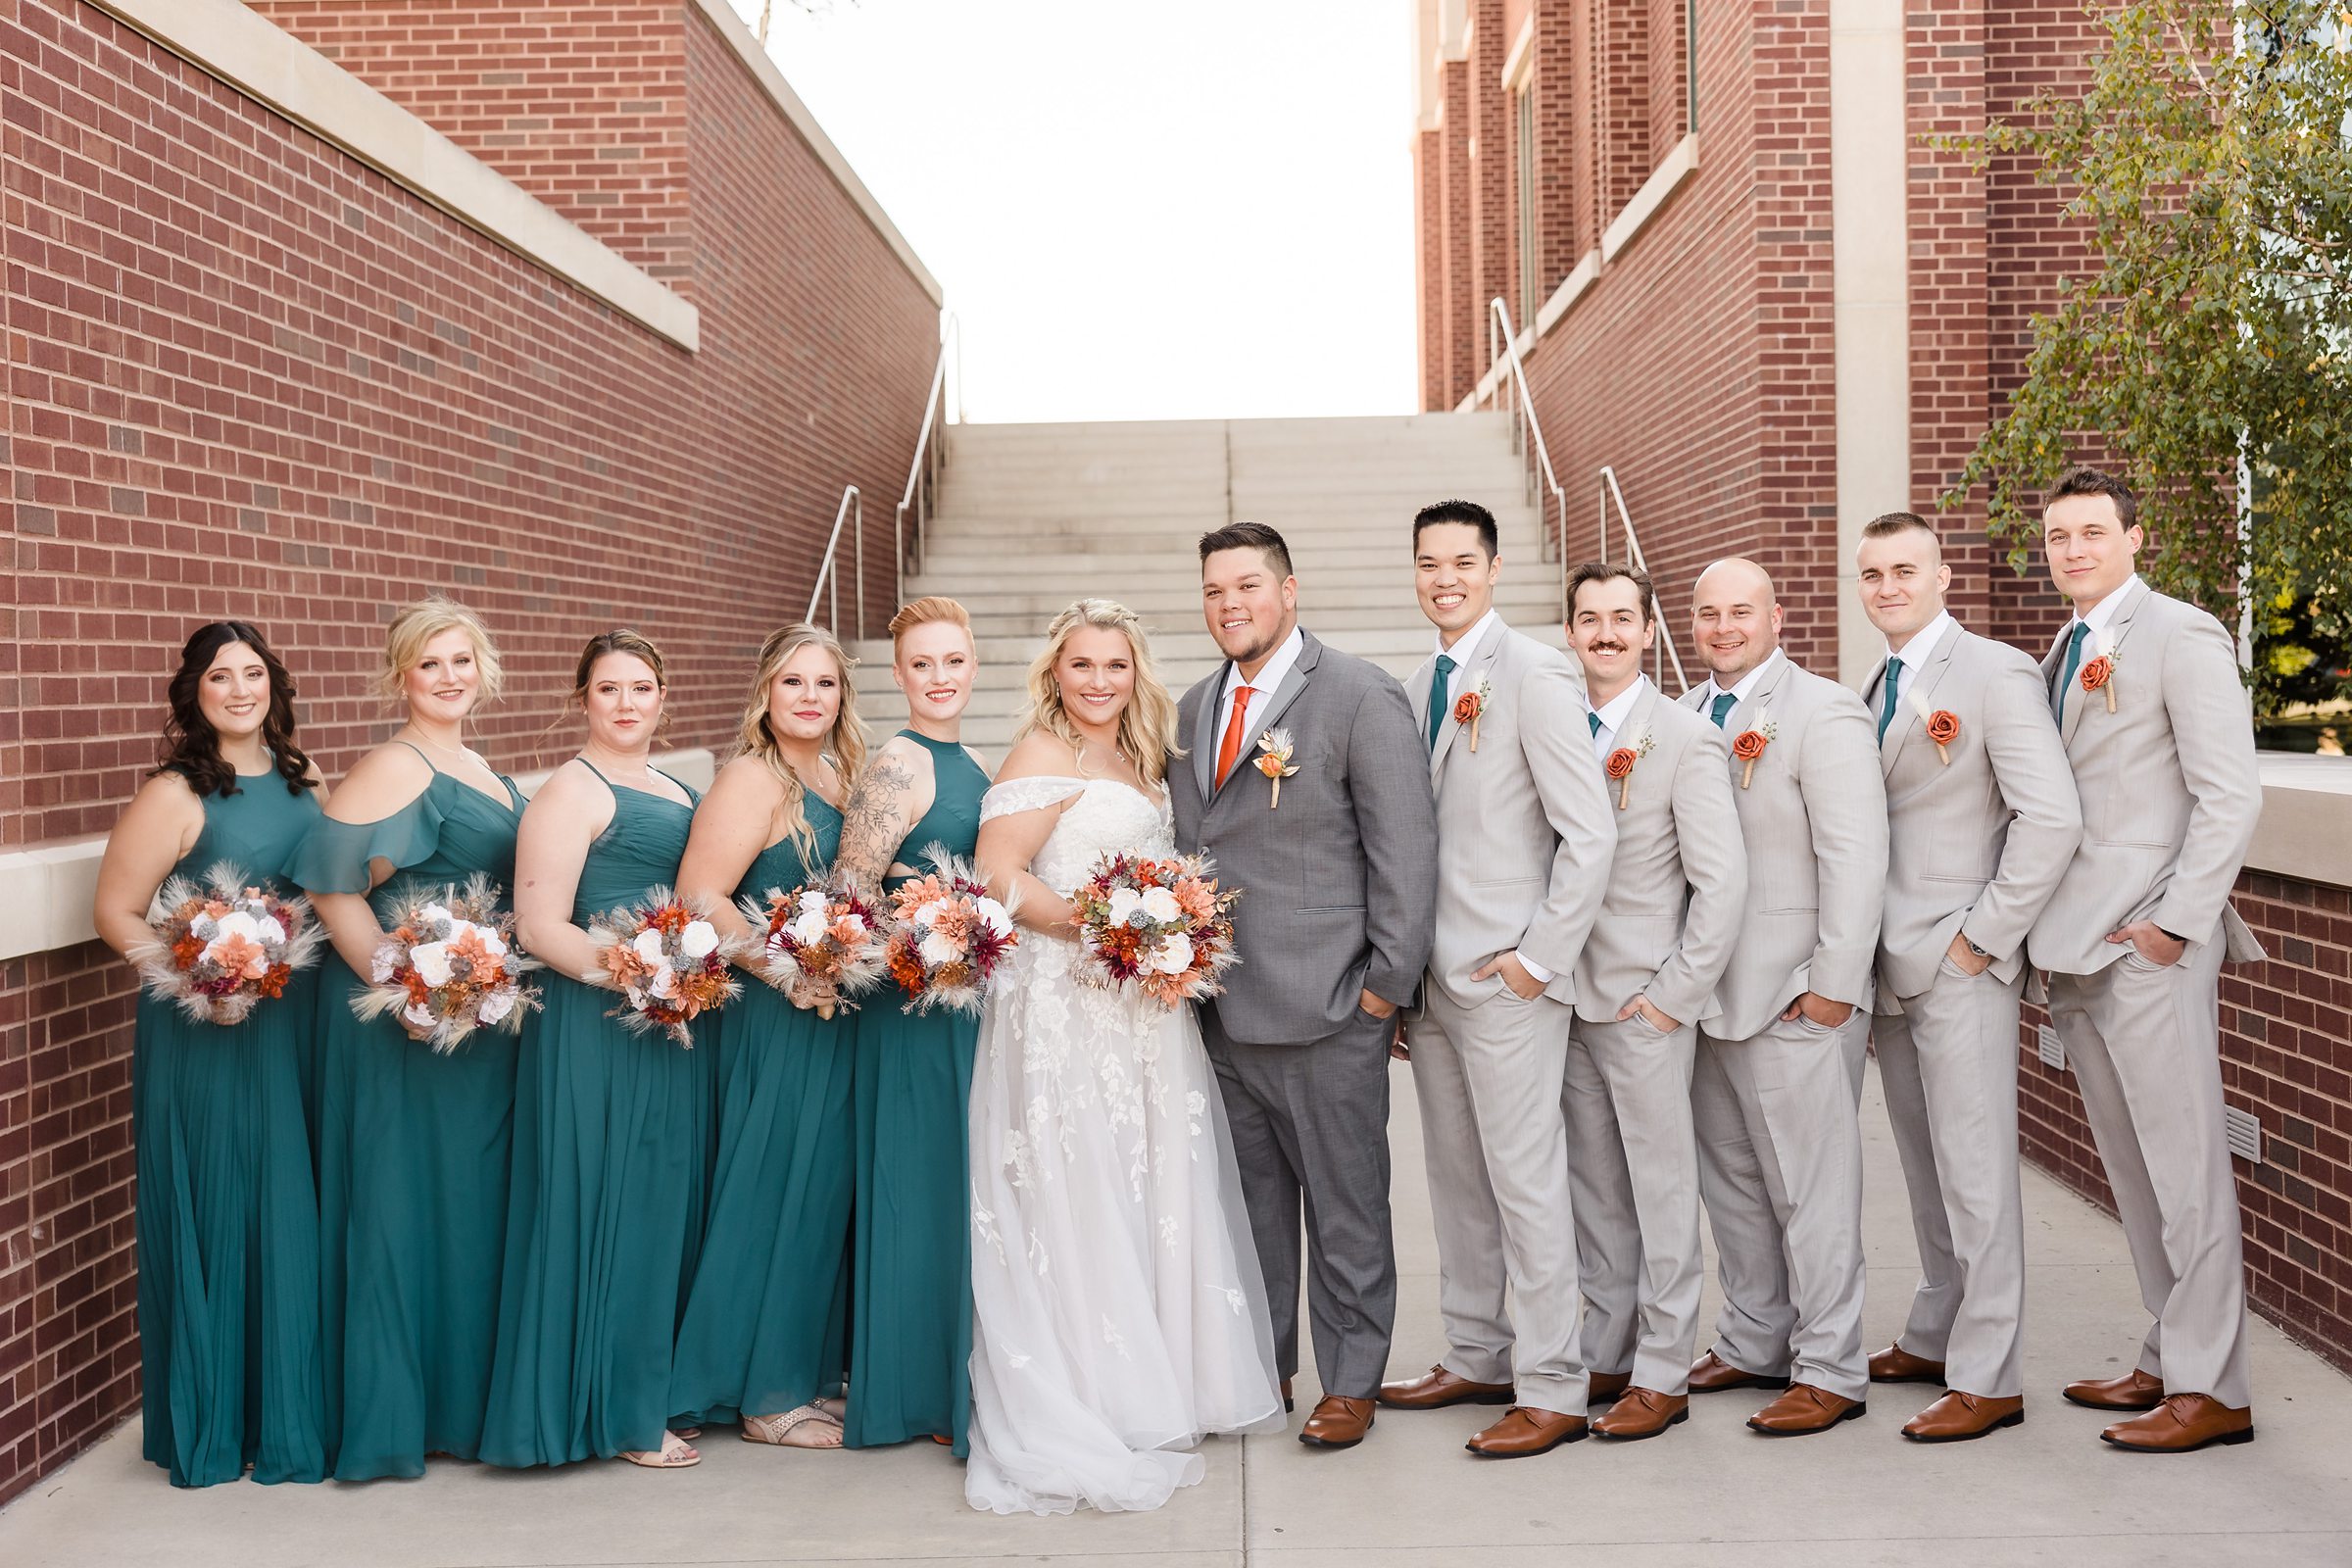 Bridal Party celebrate before a wedding at the Destihl Brewery in Normal, Illinois.